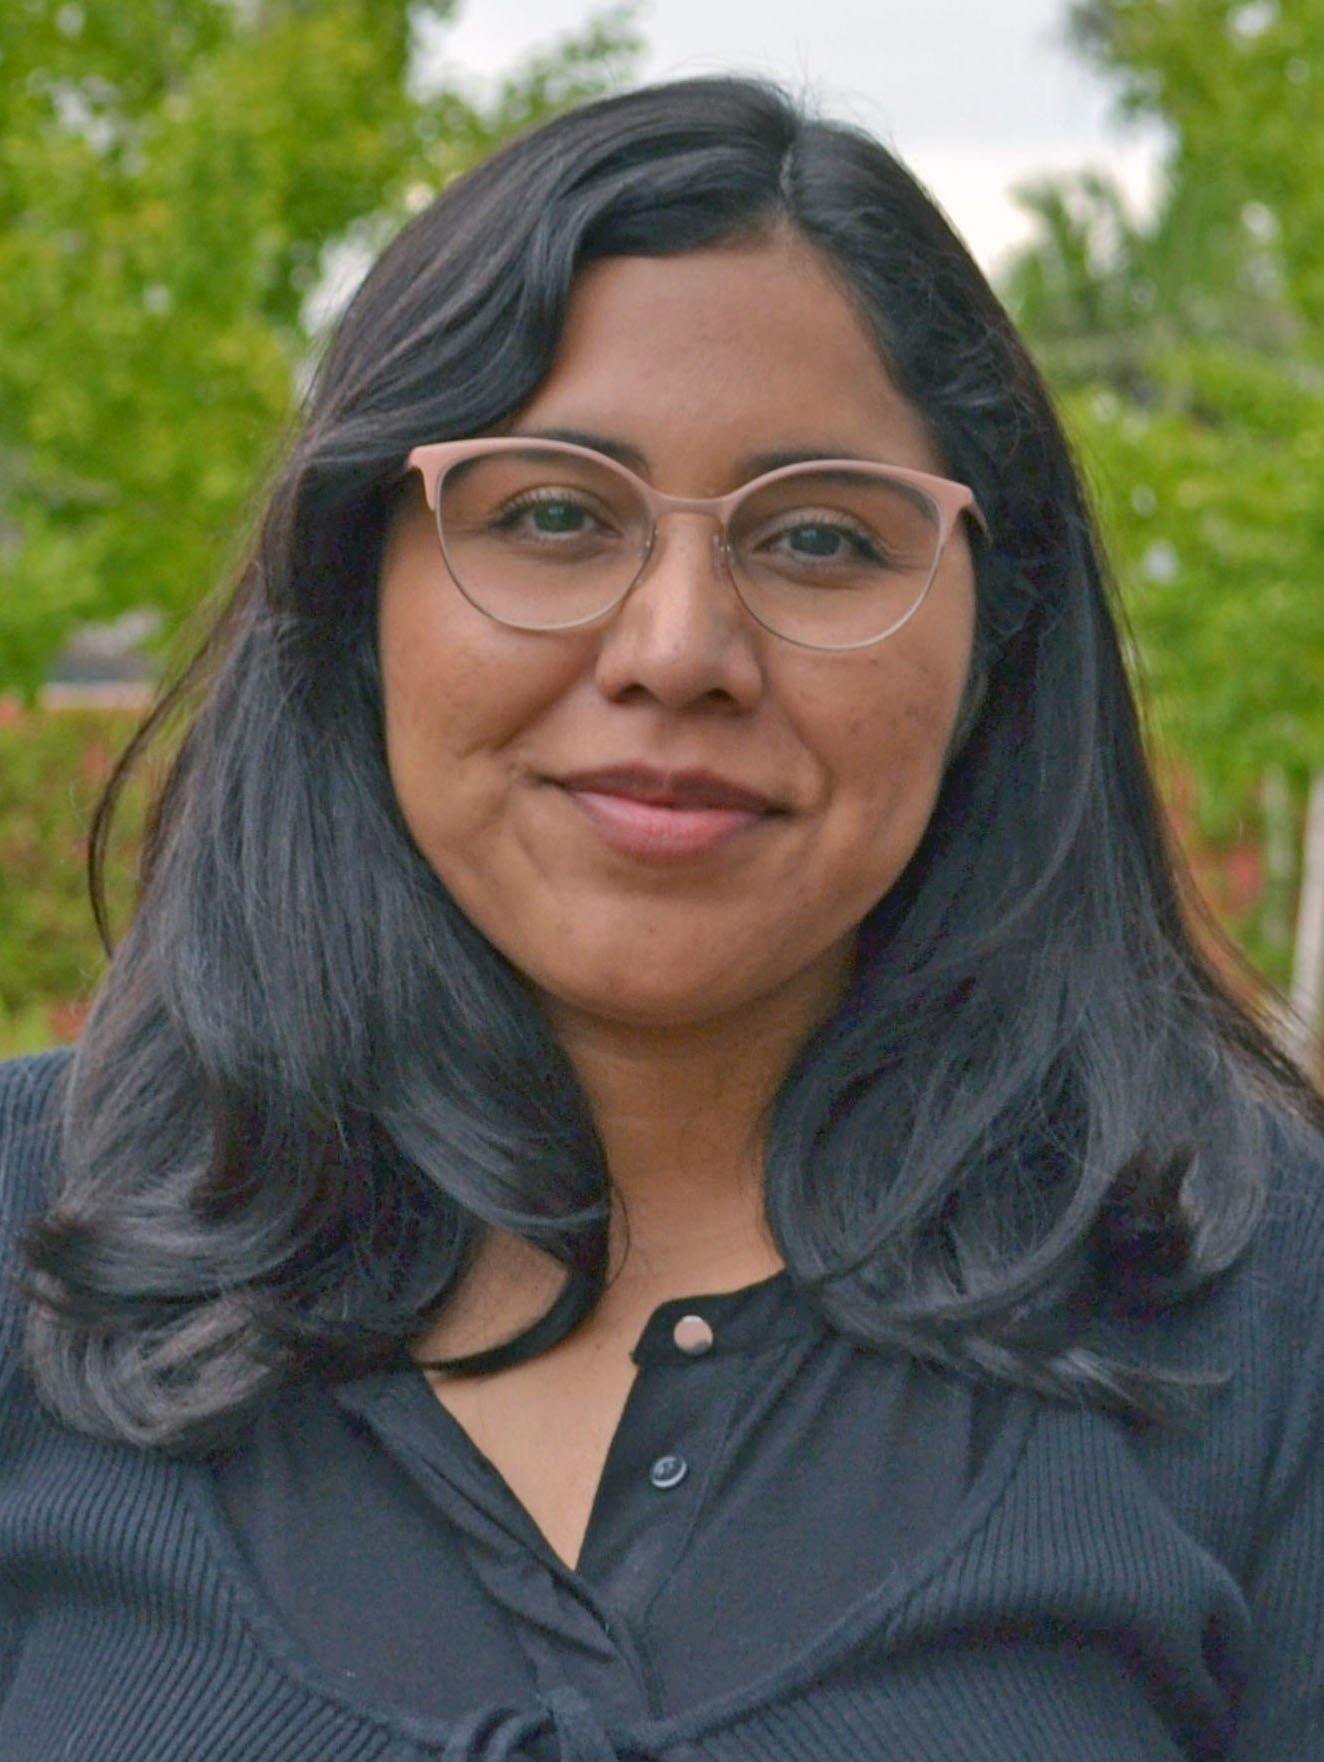 A person with long hair and glasses.